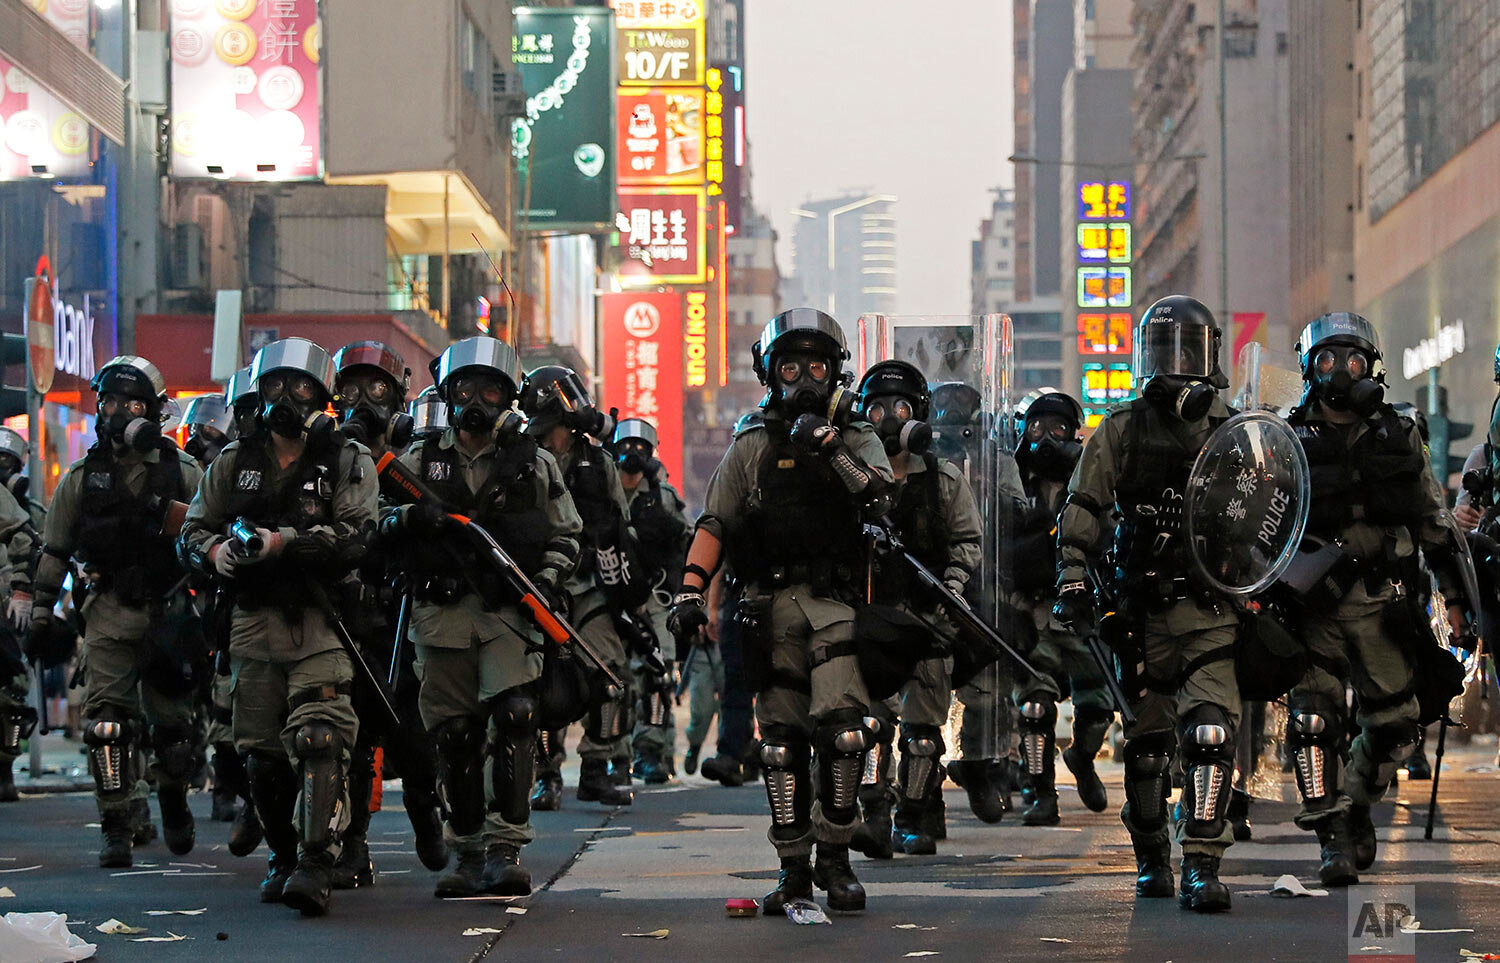  Riot police move forward as anti-government protestors occupied a road in Hong Kong on Oct. 1, 2019. (AP Photo/Kin Cheung) 